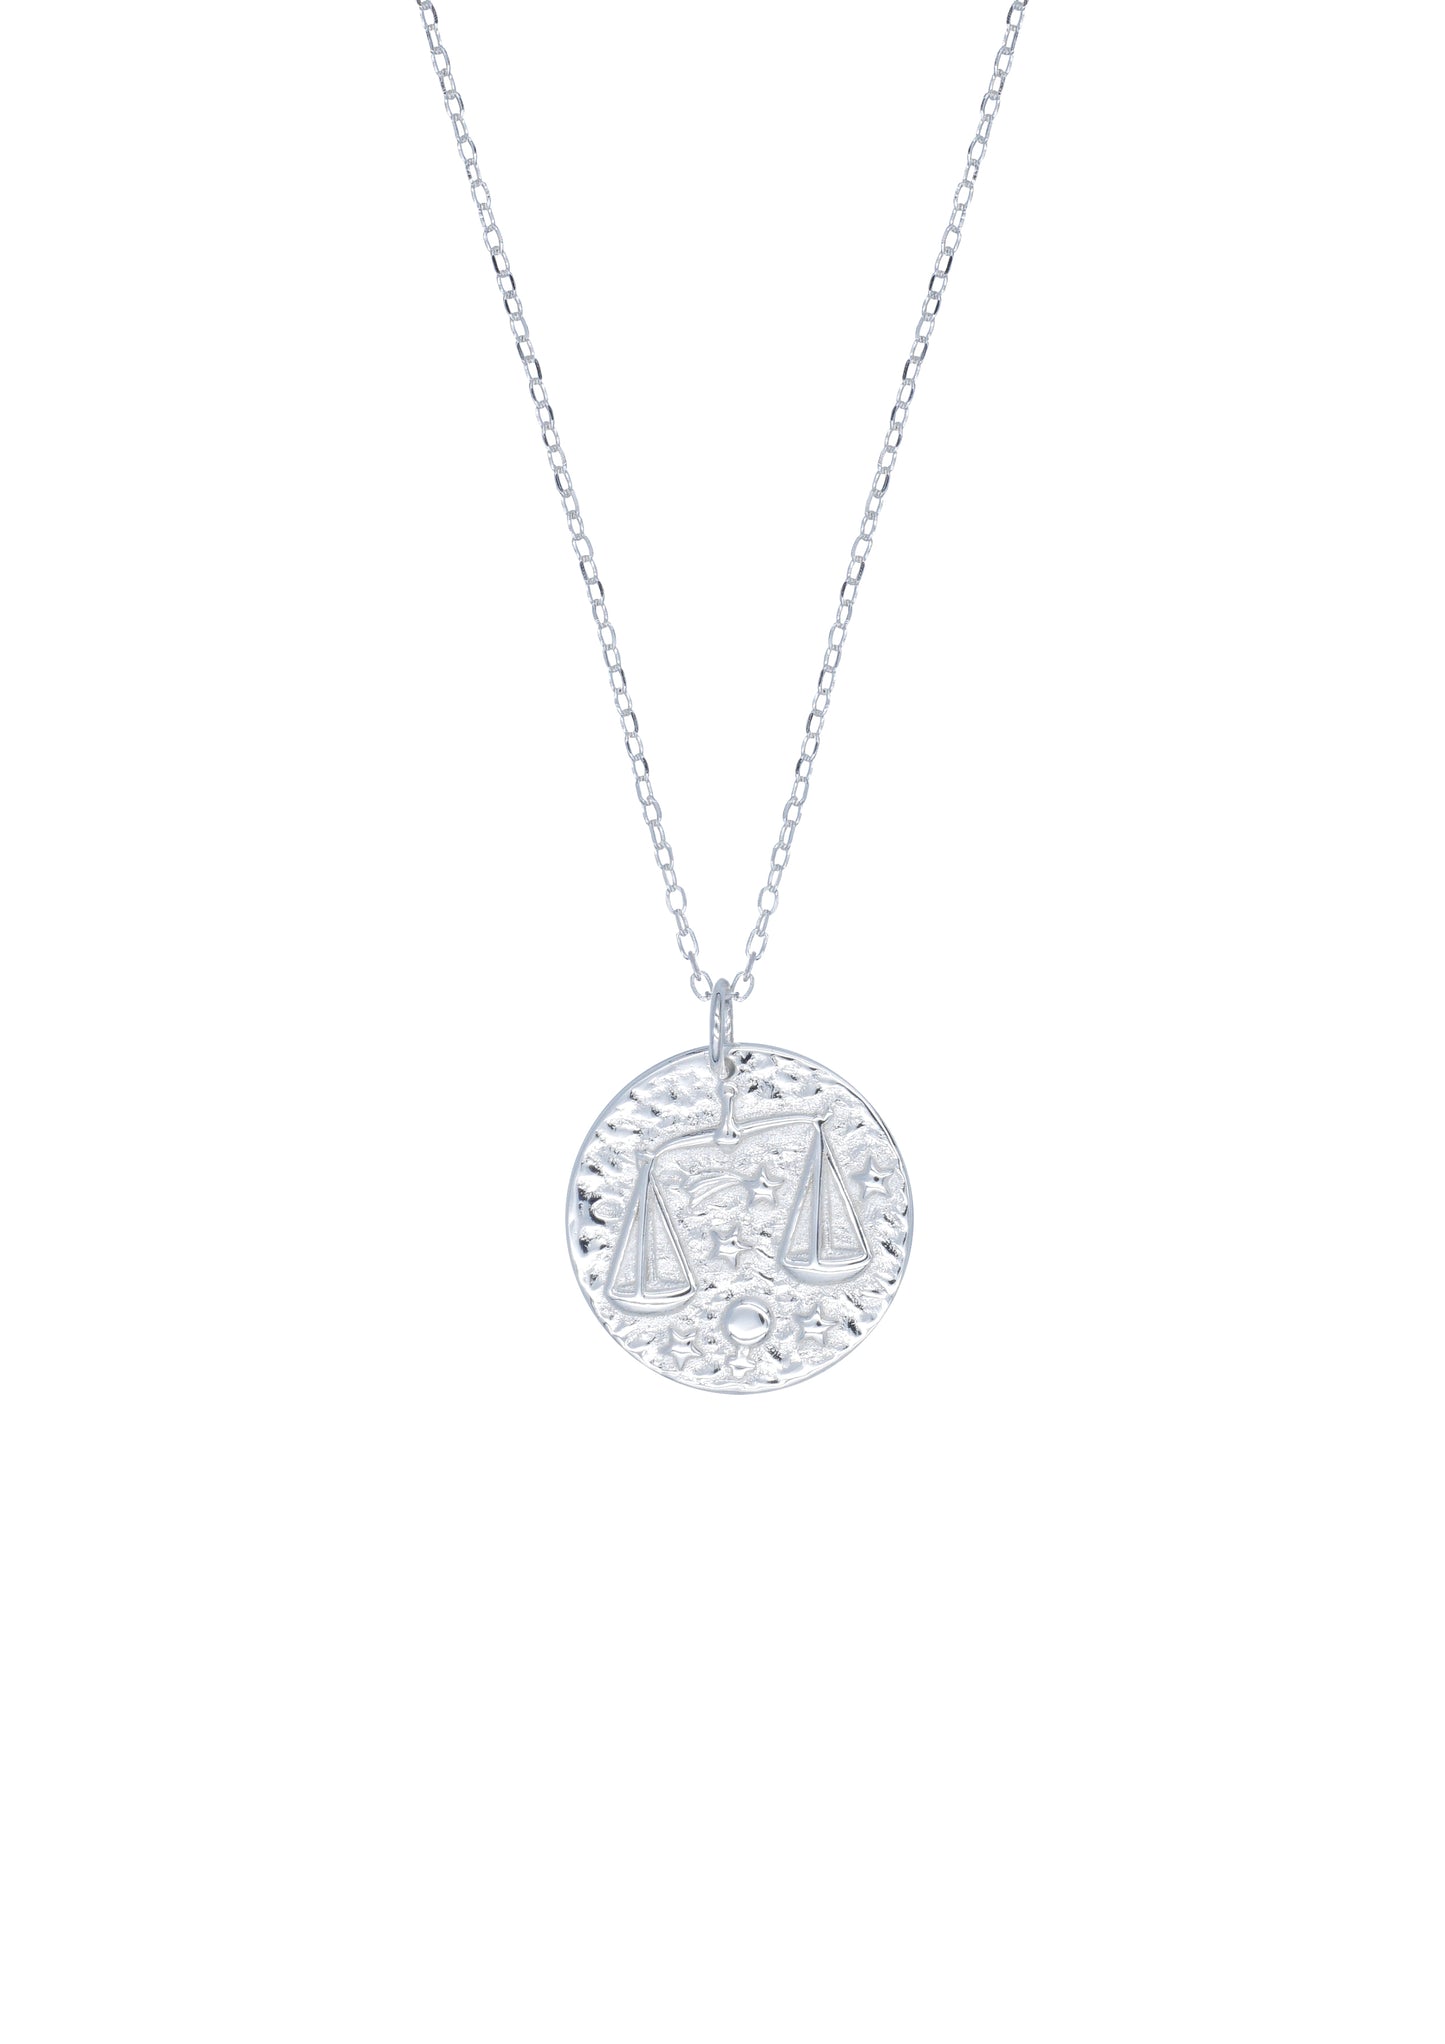 Libra Necklace Silver - ISSHU